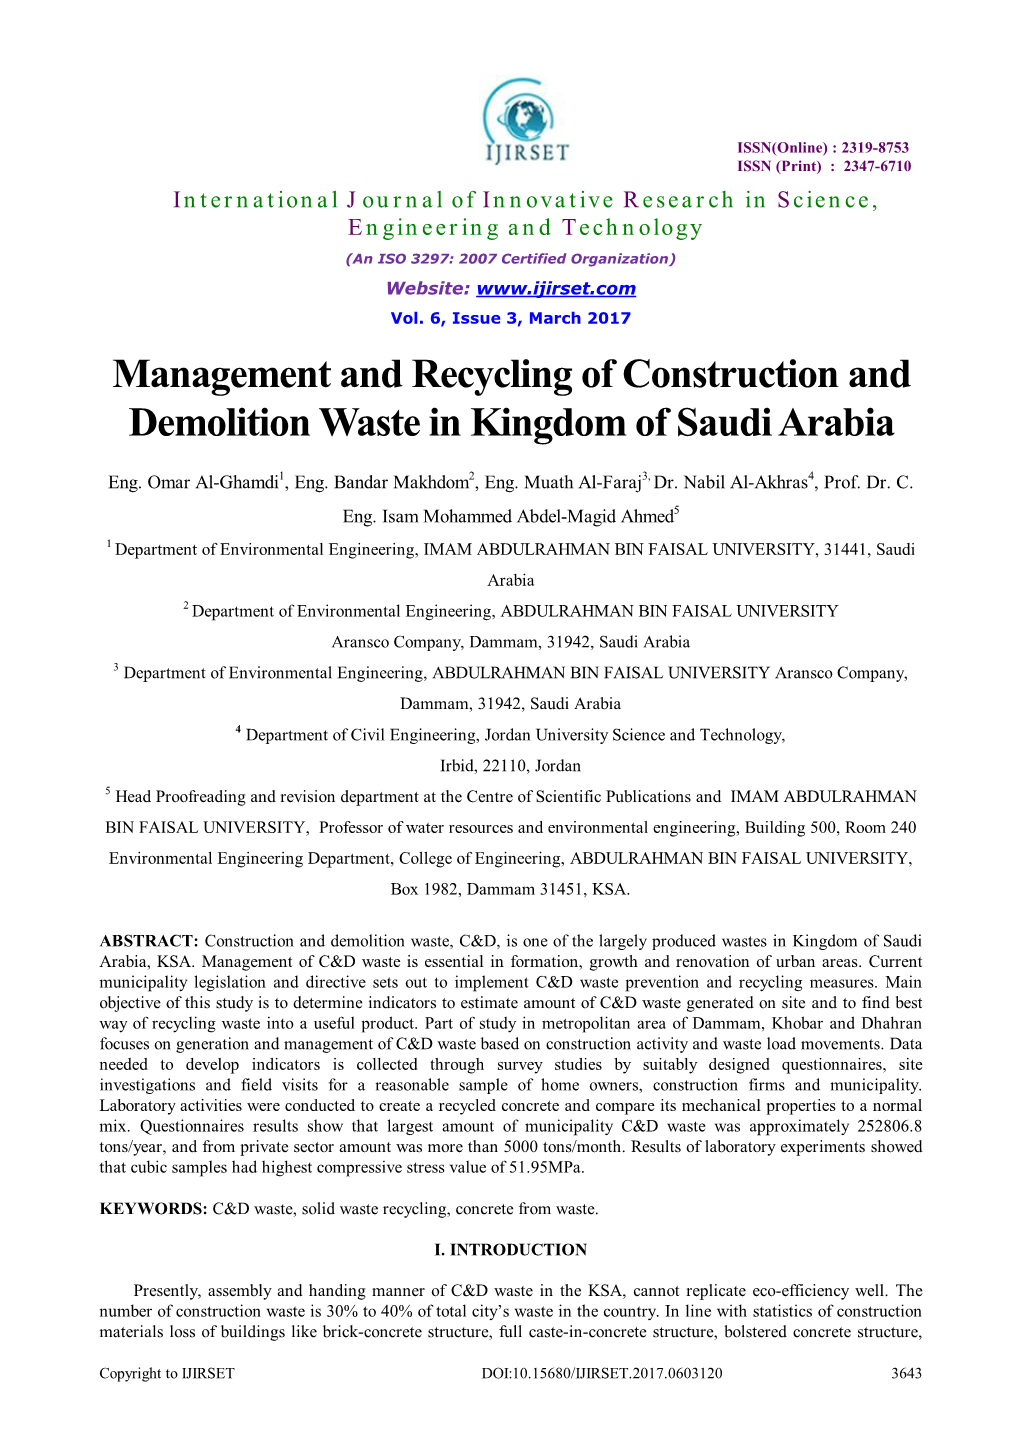 Management and Recycling of Construction and Demolition Waste in Kingdom of Saudi Arabia